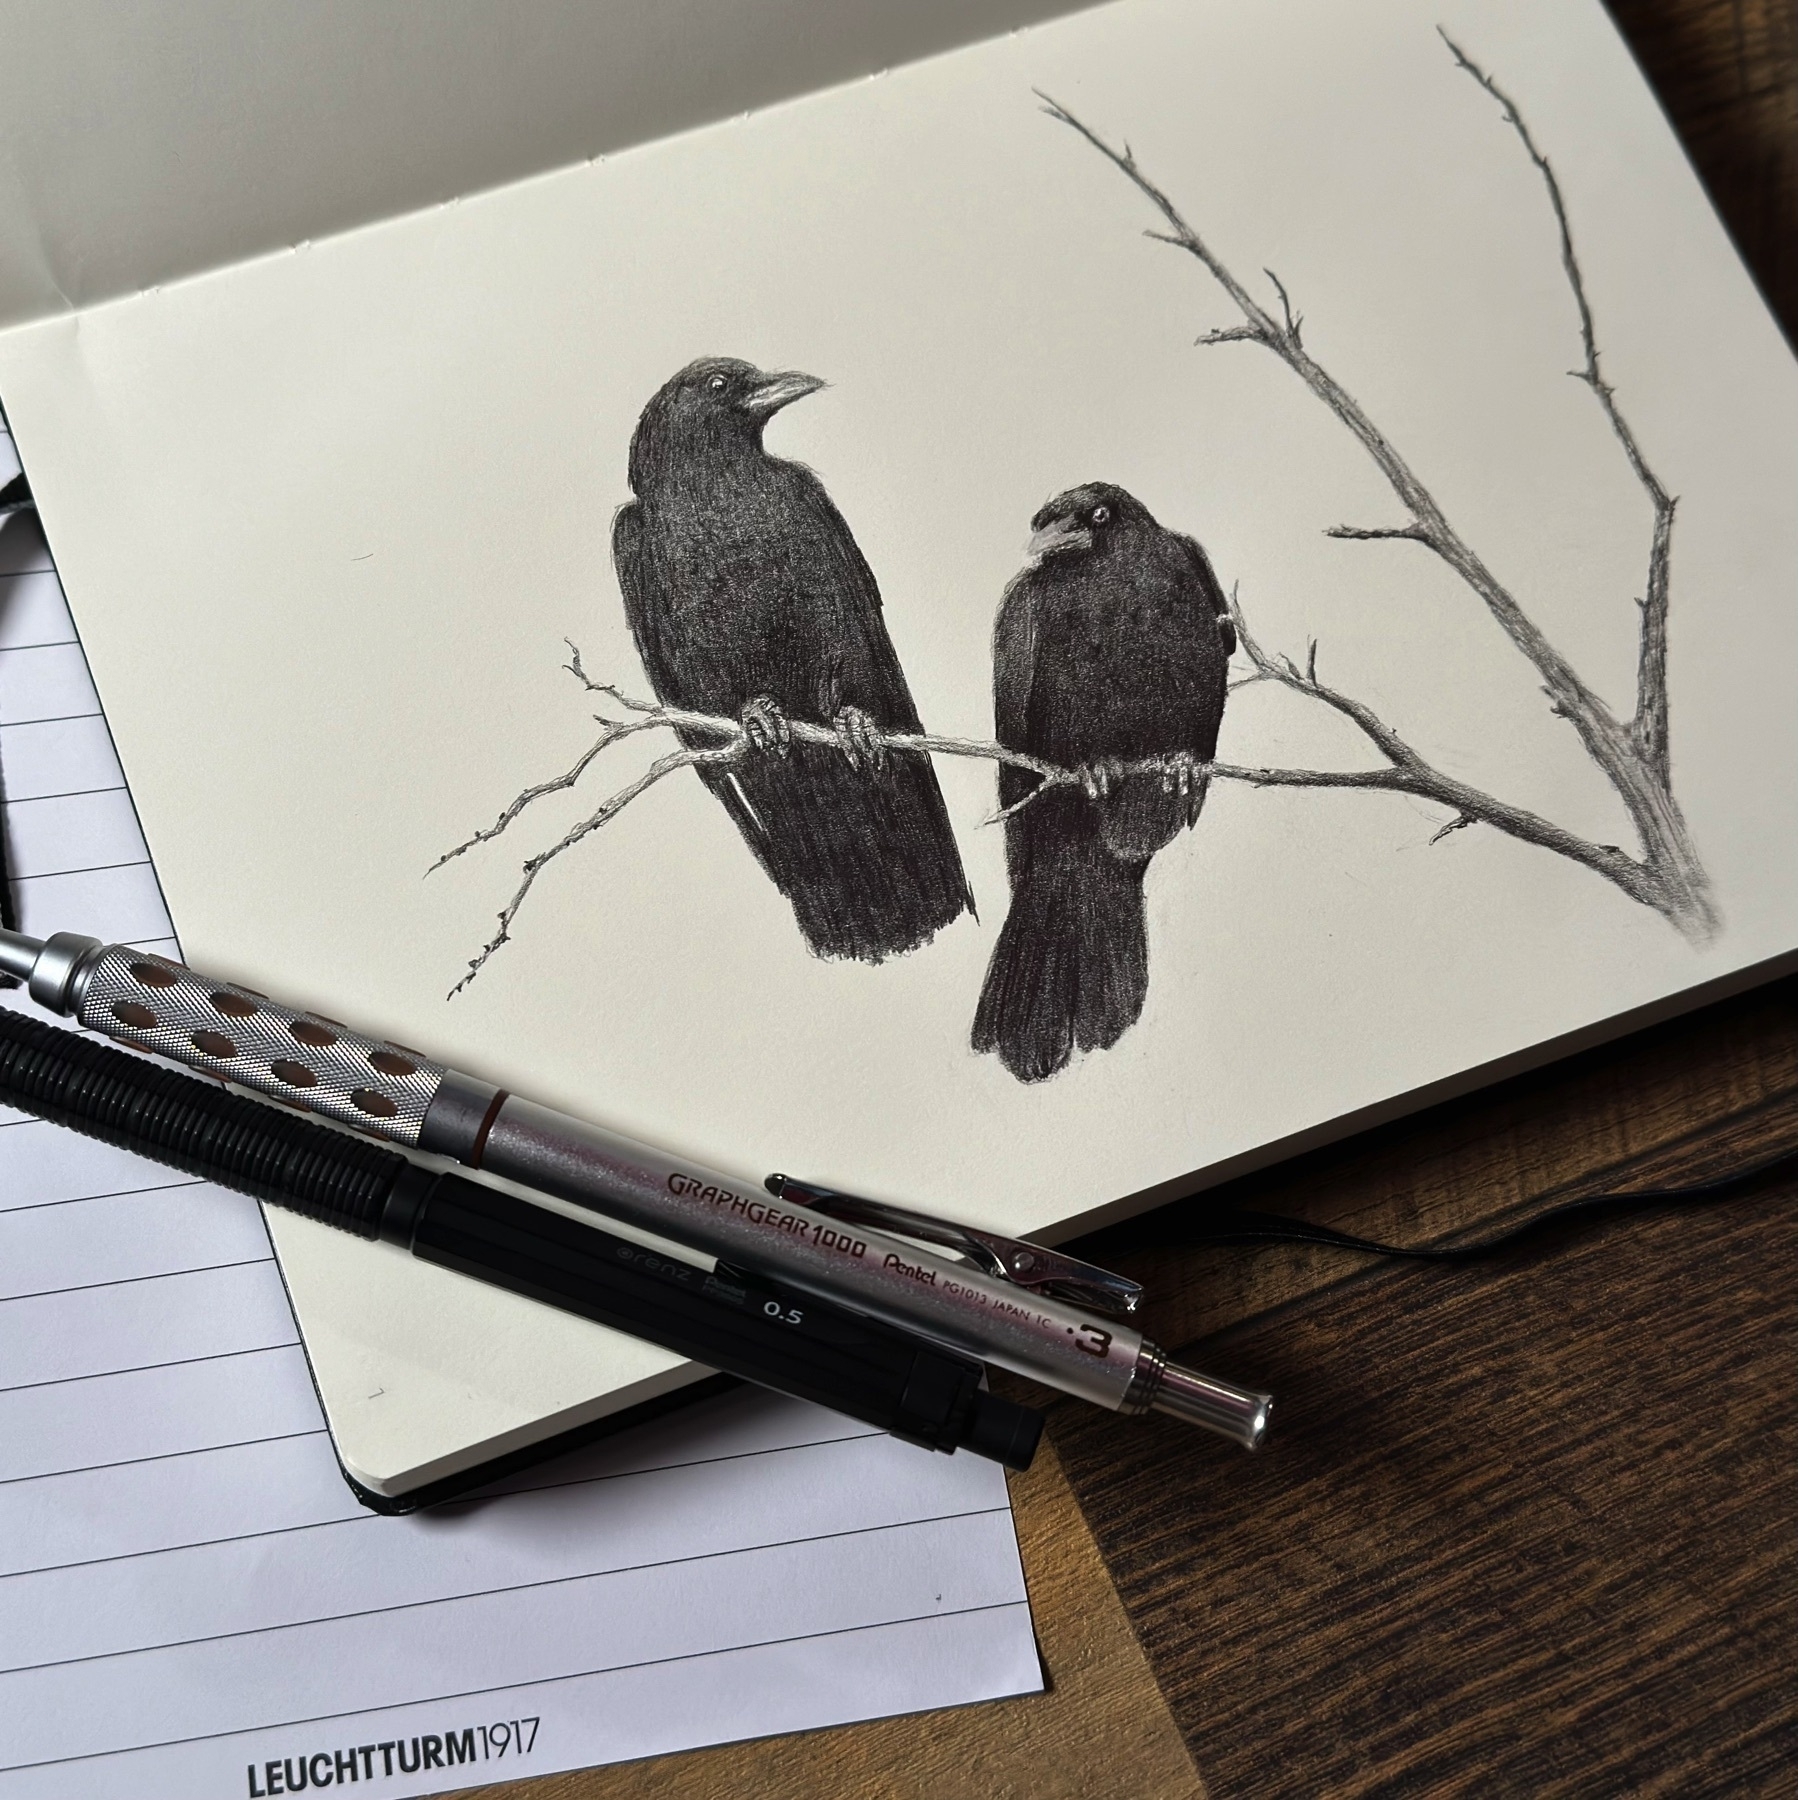 A pencil drawing of two crows perched on a branch, with the drawing situated on an open sketchbook page. A mechanical pencil rests on the sketchbook's edge, next to the drawing. The sketchbook is placed on a wooden table, partially atop a piece of paper with grid lines. The image conveys a calm, studious atmosphere often associated with an artist's workspace.